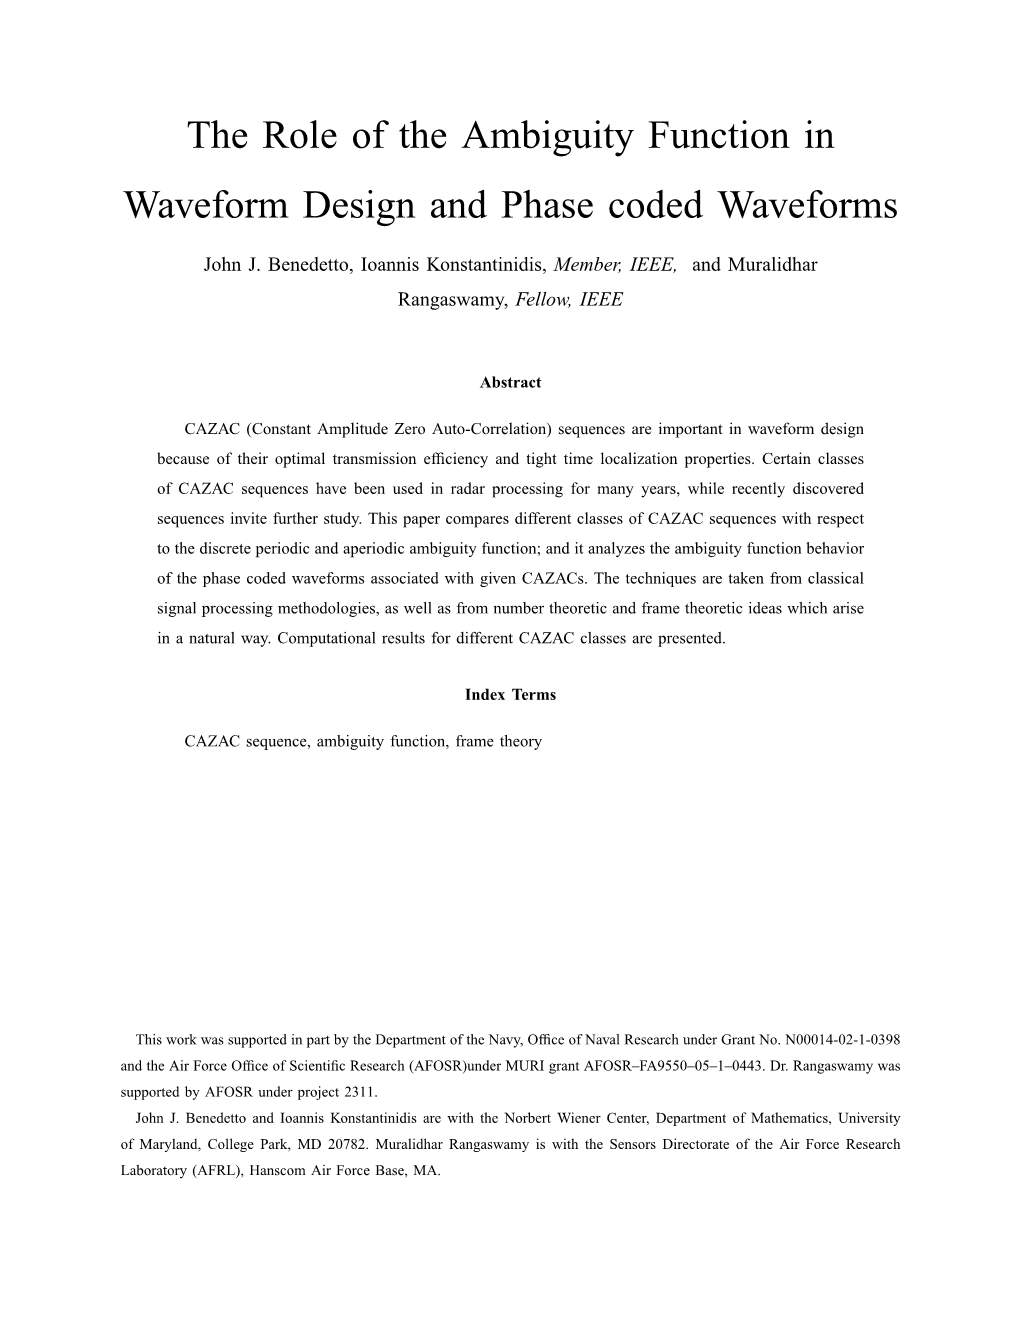 The Role of the Ambiguity Function in Waveform Design and Phase Coded Waveforms